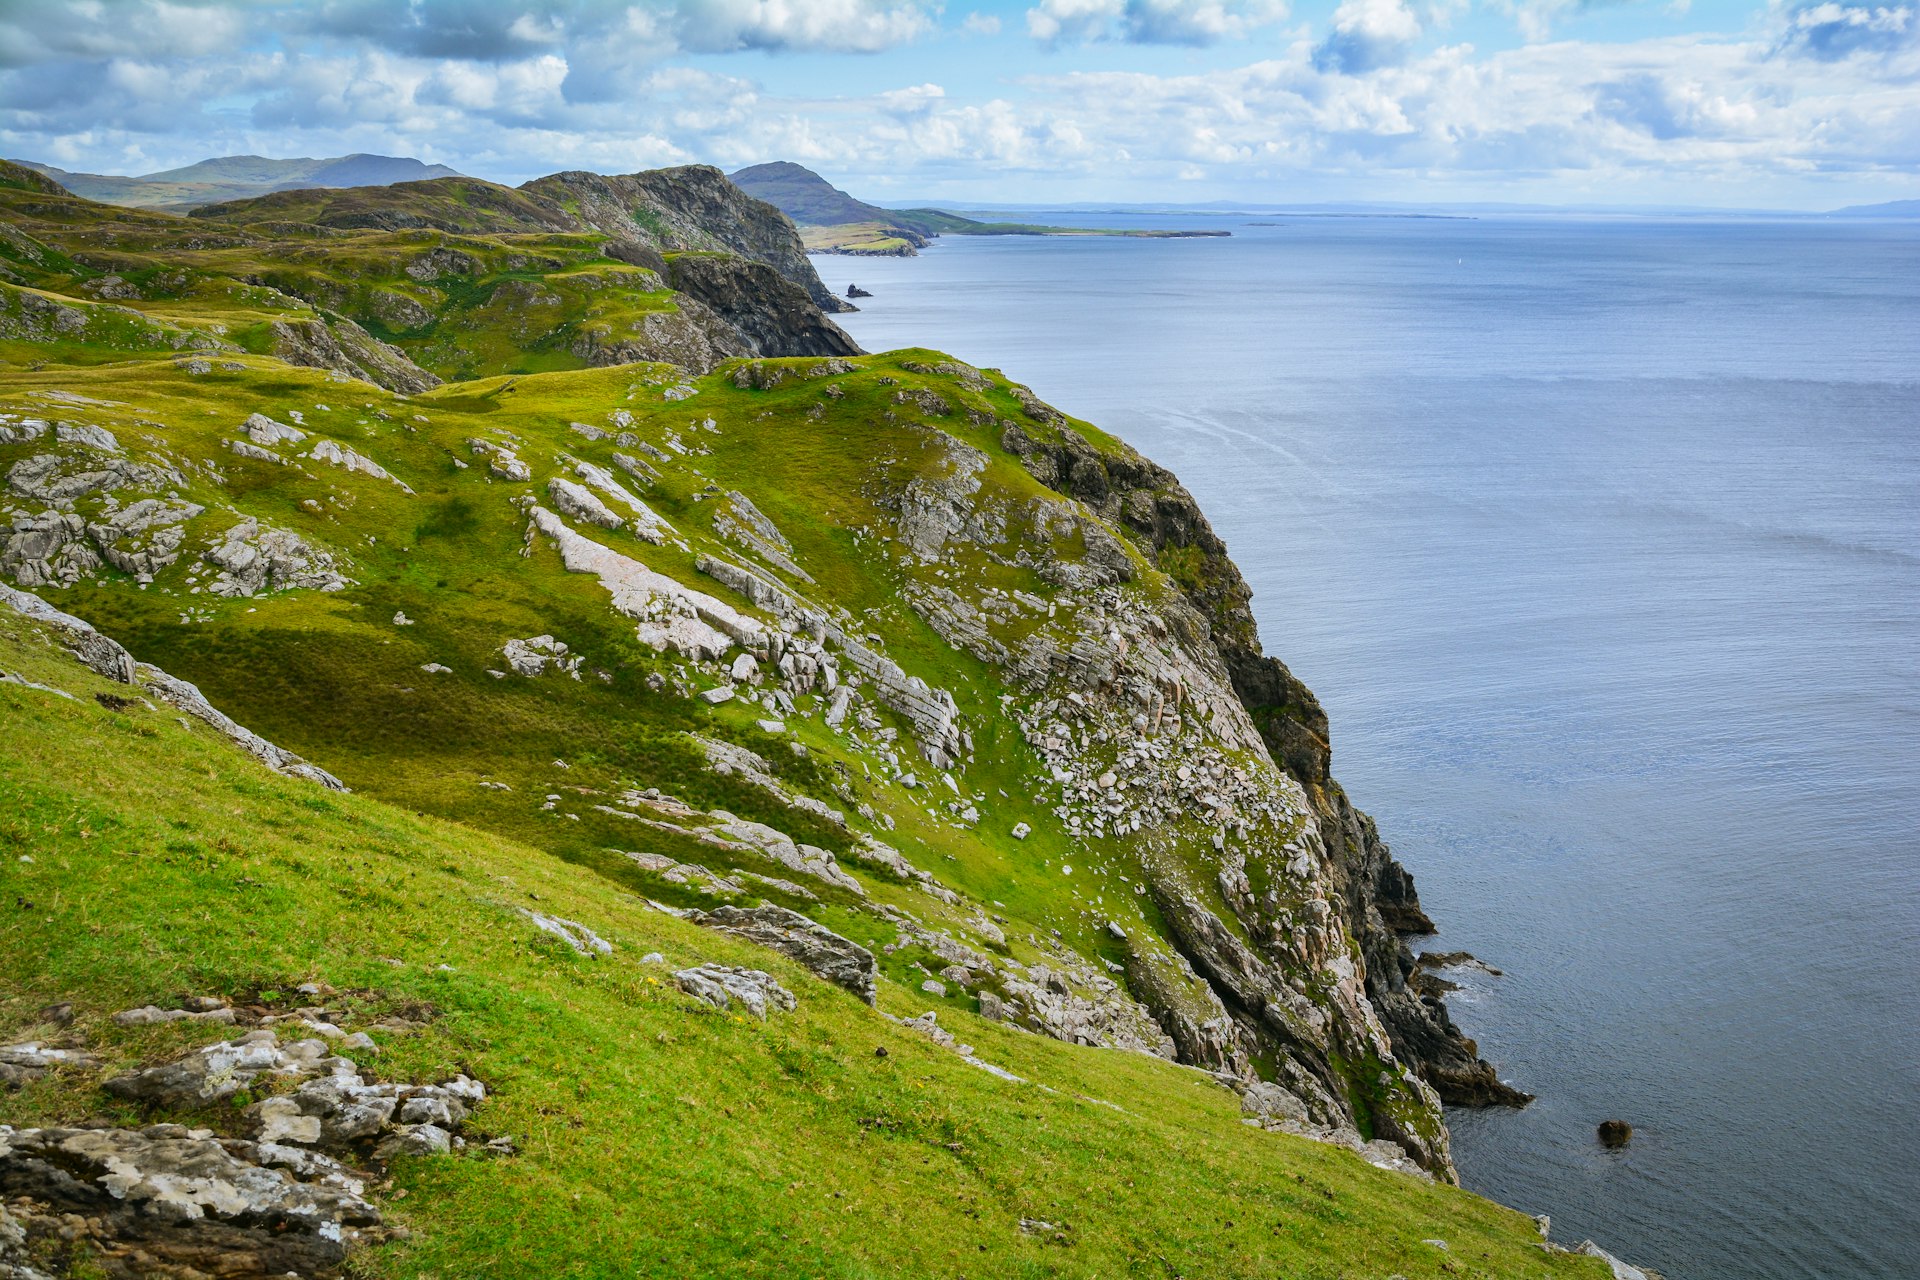 Cliffs near the Slieve League, County Donegal, Ireland